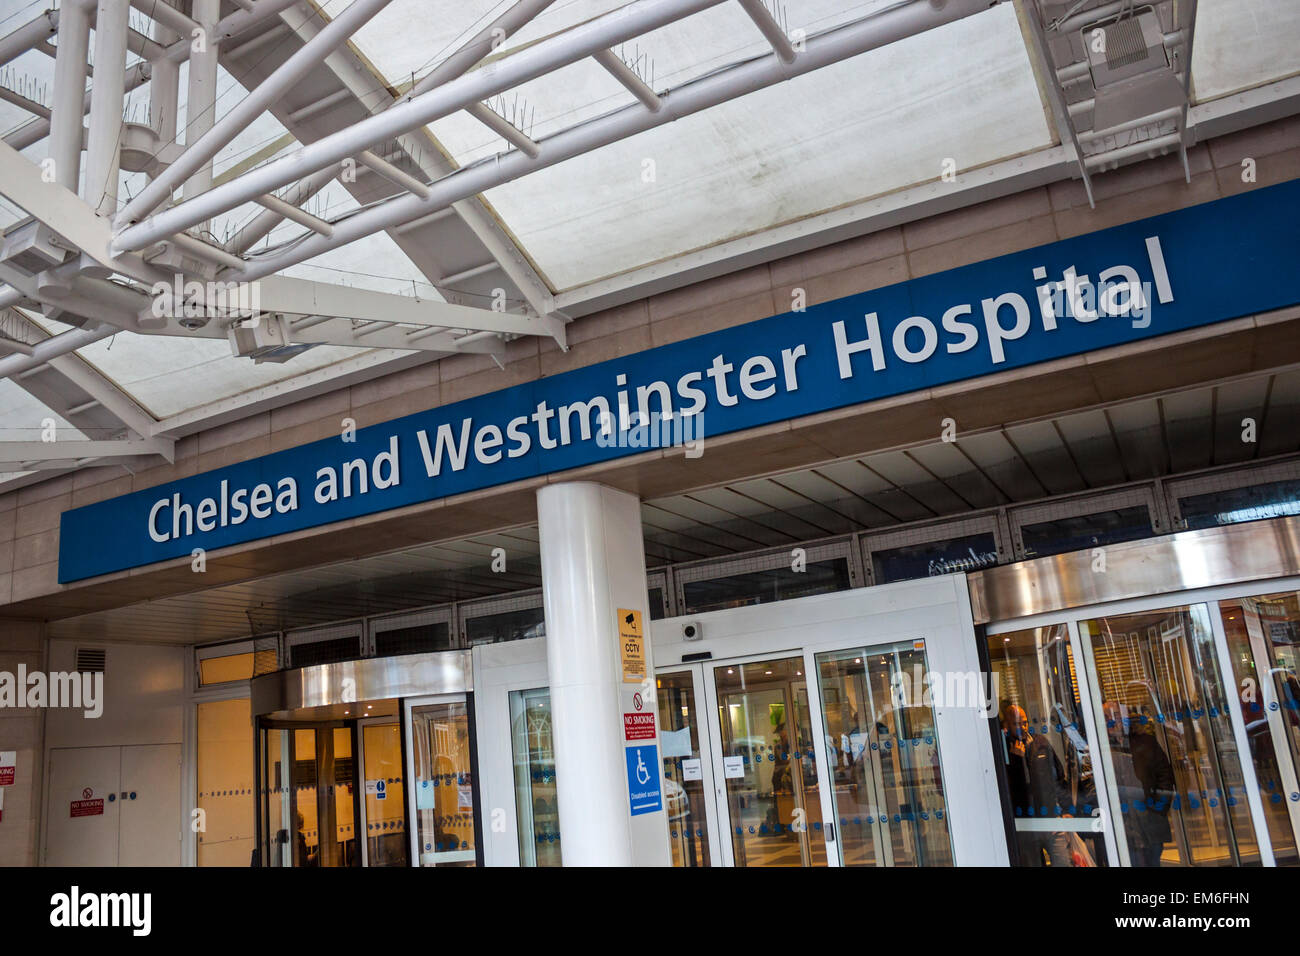 Chesea and Westminster Hospital, Old Brompton Road, London Stock Photo